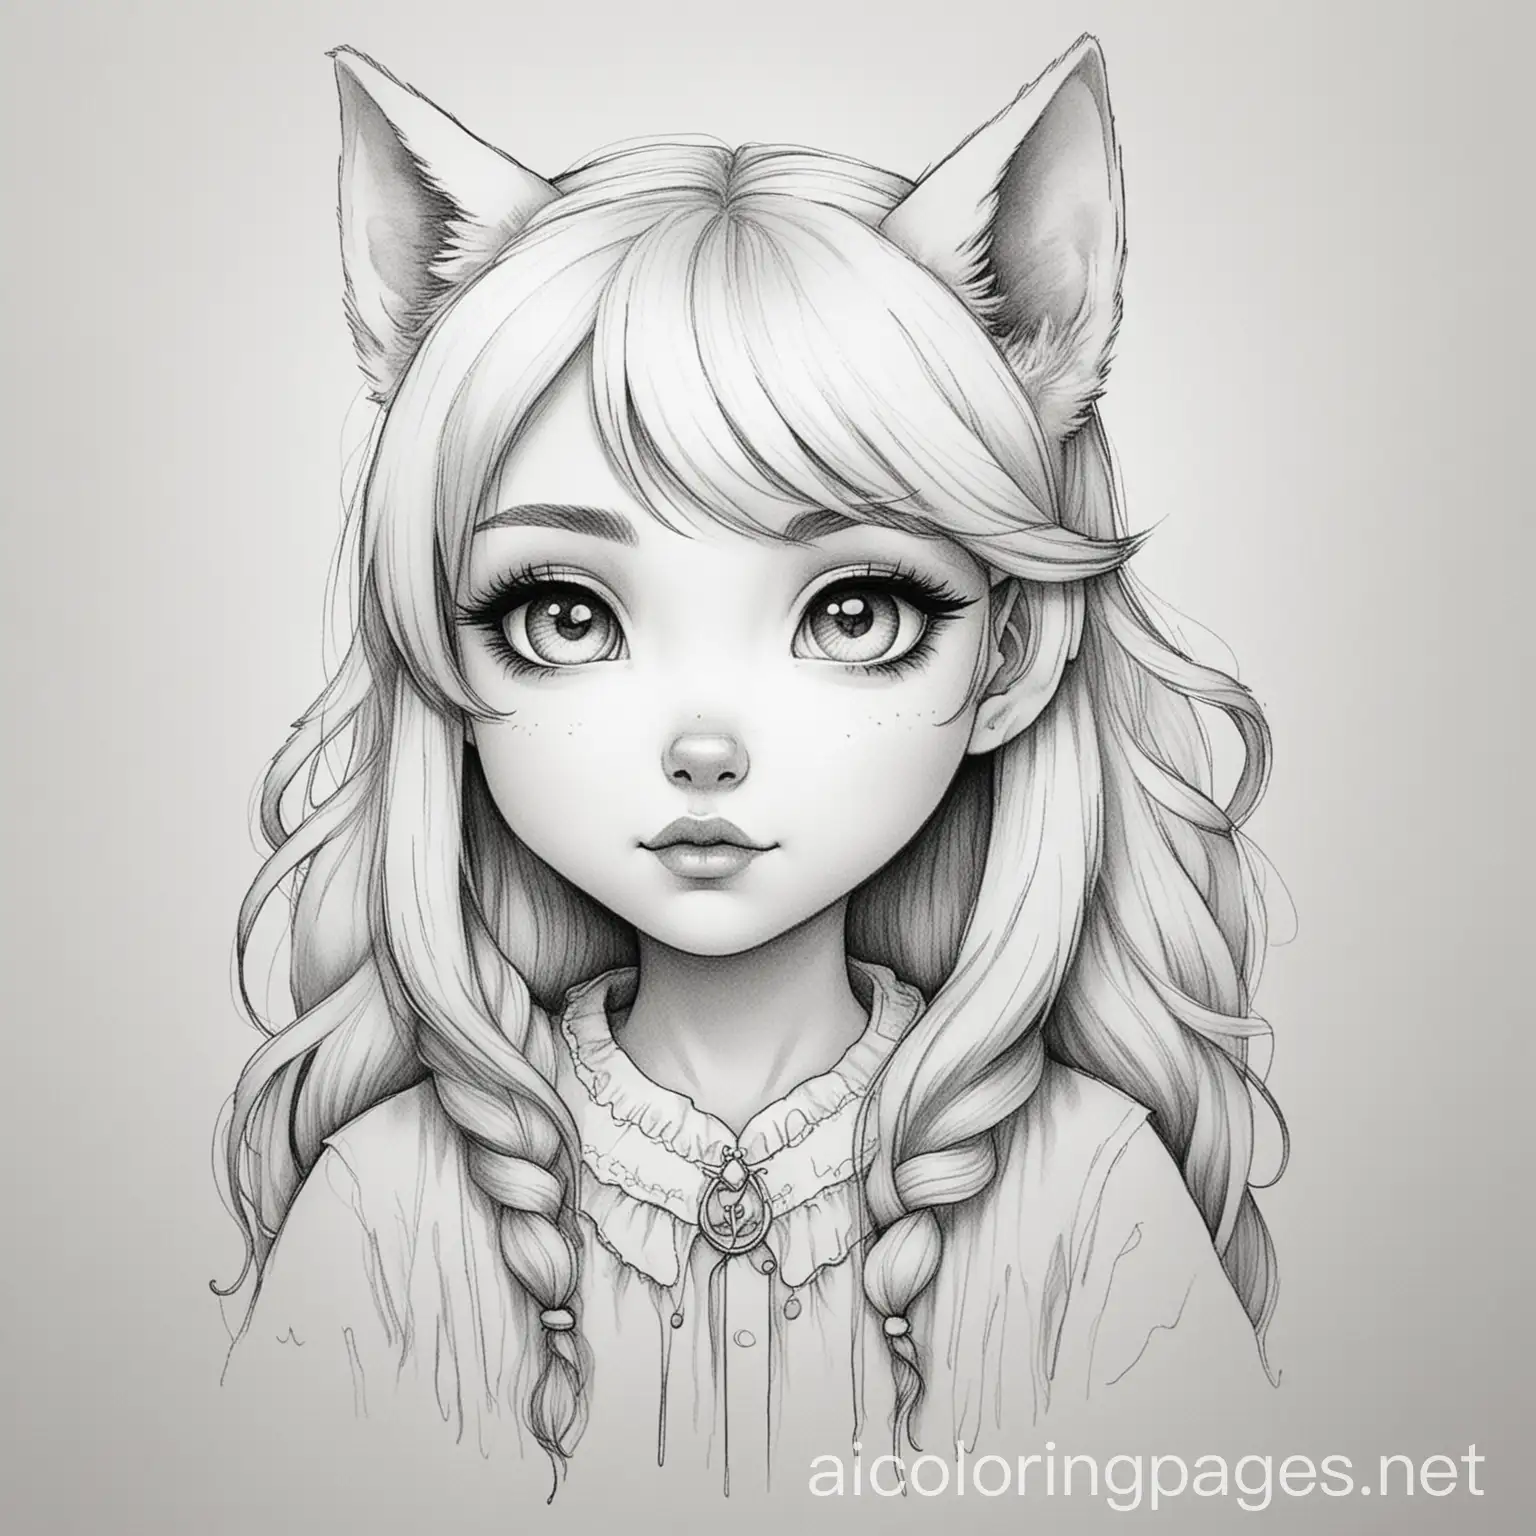 little wolf girl, Coloring Page, black and white, line art, white background, Simplicity, Ample White Space. The background of the coloring page is plain white to make it easy for young children to color within the lines. The outlines of all the subjects are easy to distinguish, making it simple for kids to color without too much difficulty